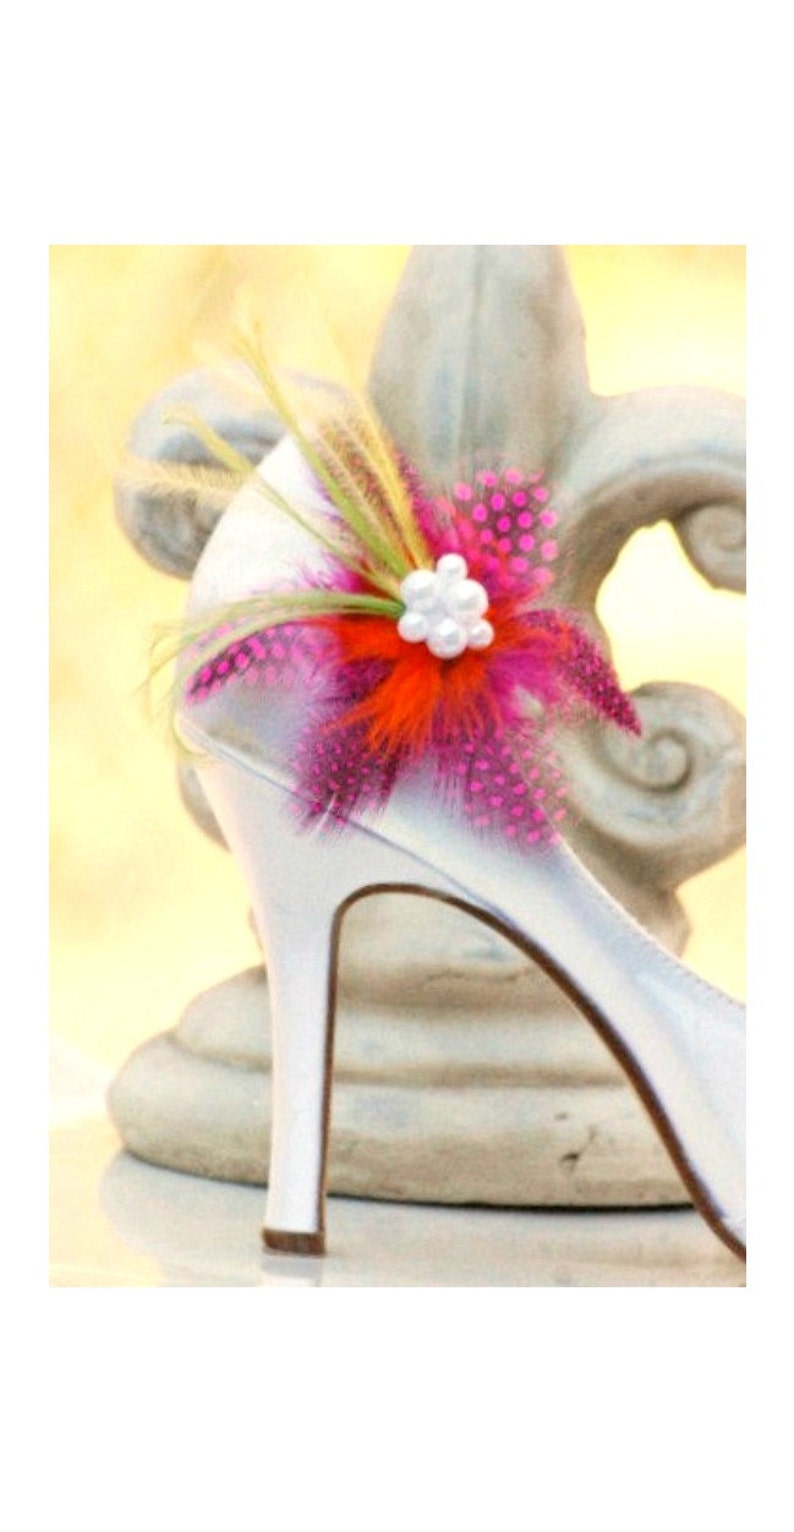 Shoe Clips Fuschia Guinea Feathers. Spring Wedding Flowers White / Ivory Pearls. Big Day Bride Bridal Bridesmaid Pins, Edgy Cheerful Bright image 1